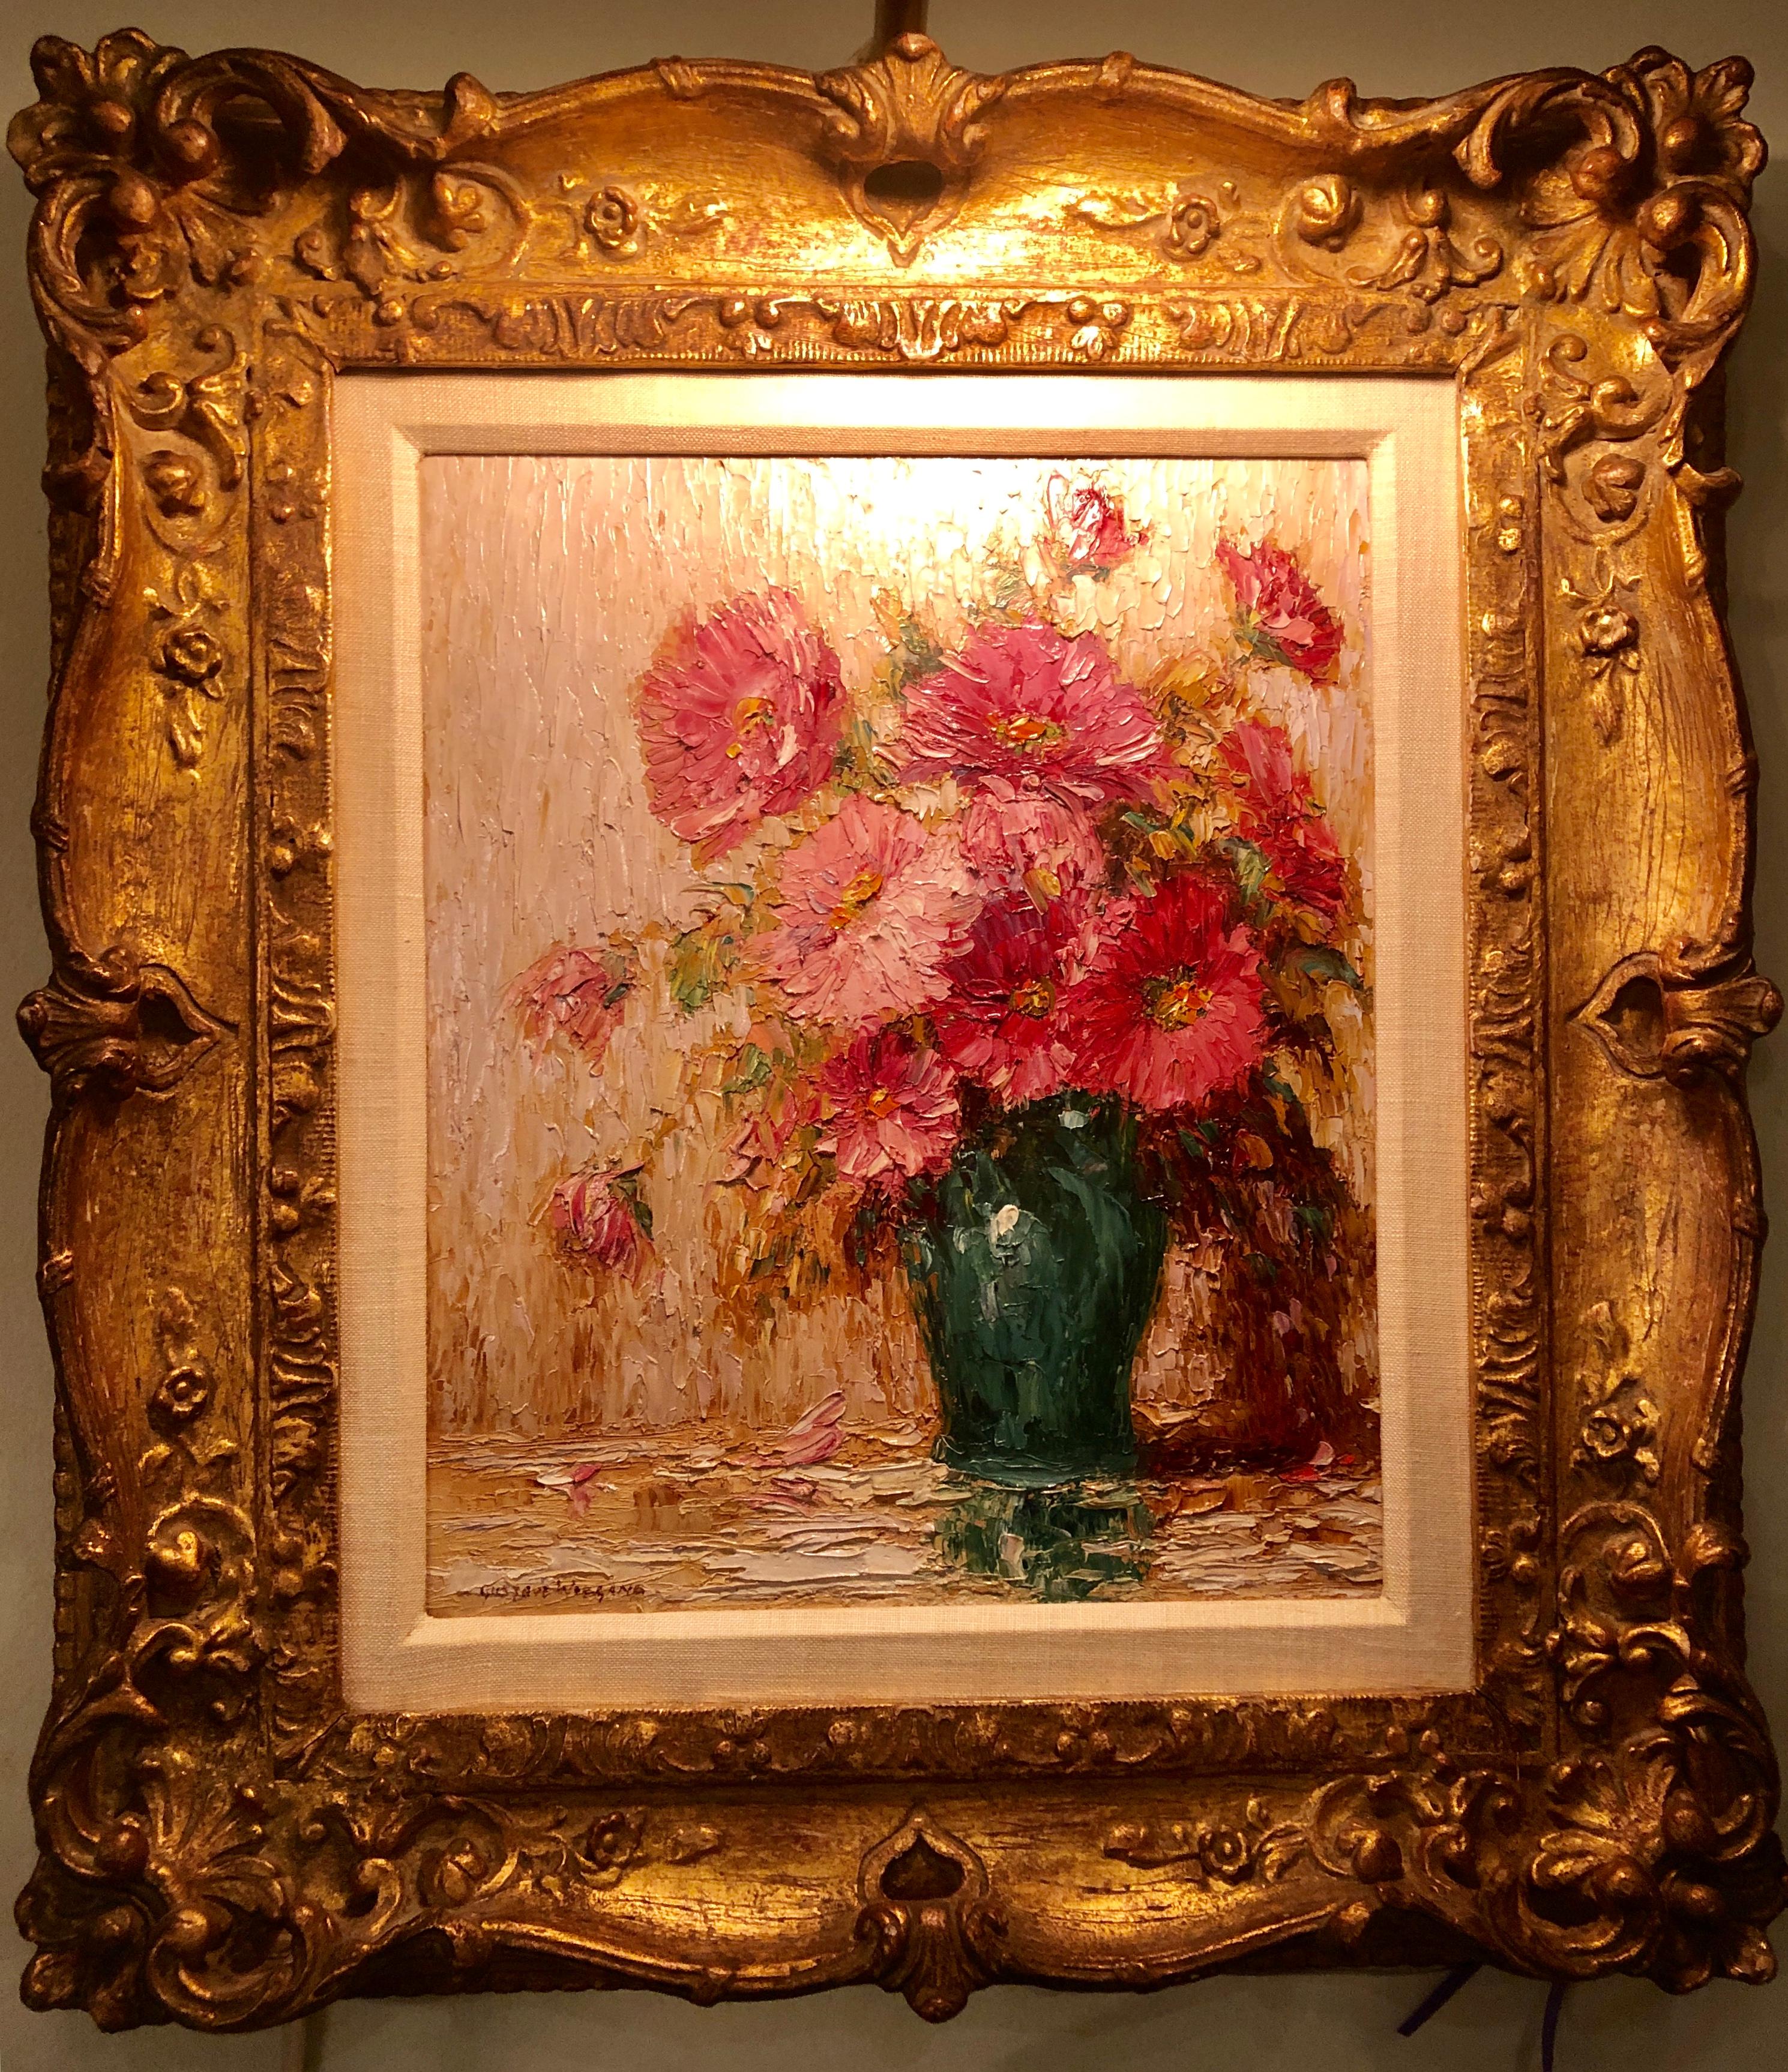 Wood Oil on Canvas Gustave Weigand German 1860-1930 Signed Floral Still Life